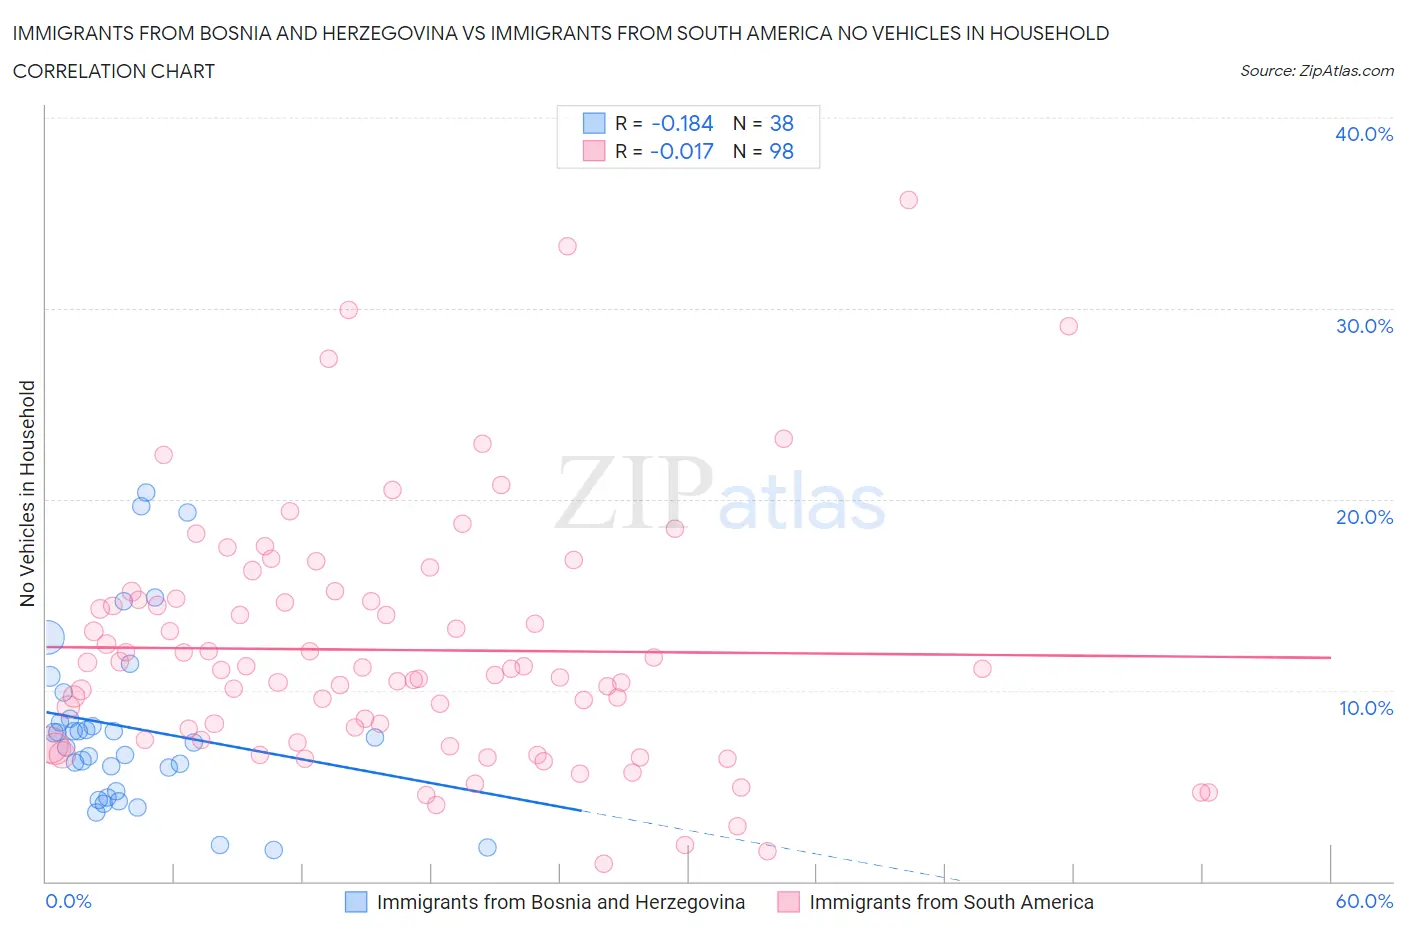 Immigrants from Bosnia and Herzegovina vs Immigrants from South America No Vehicles in Household